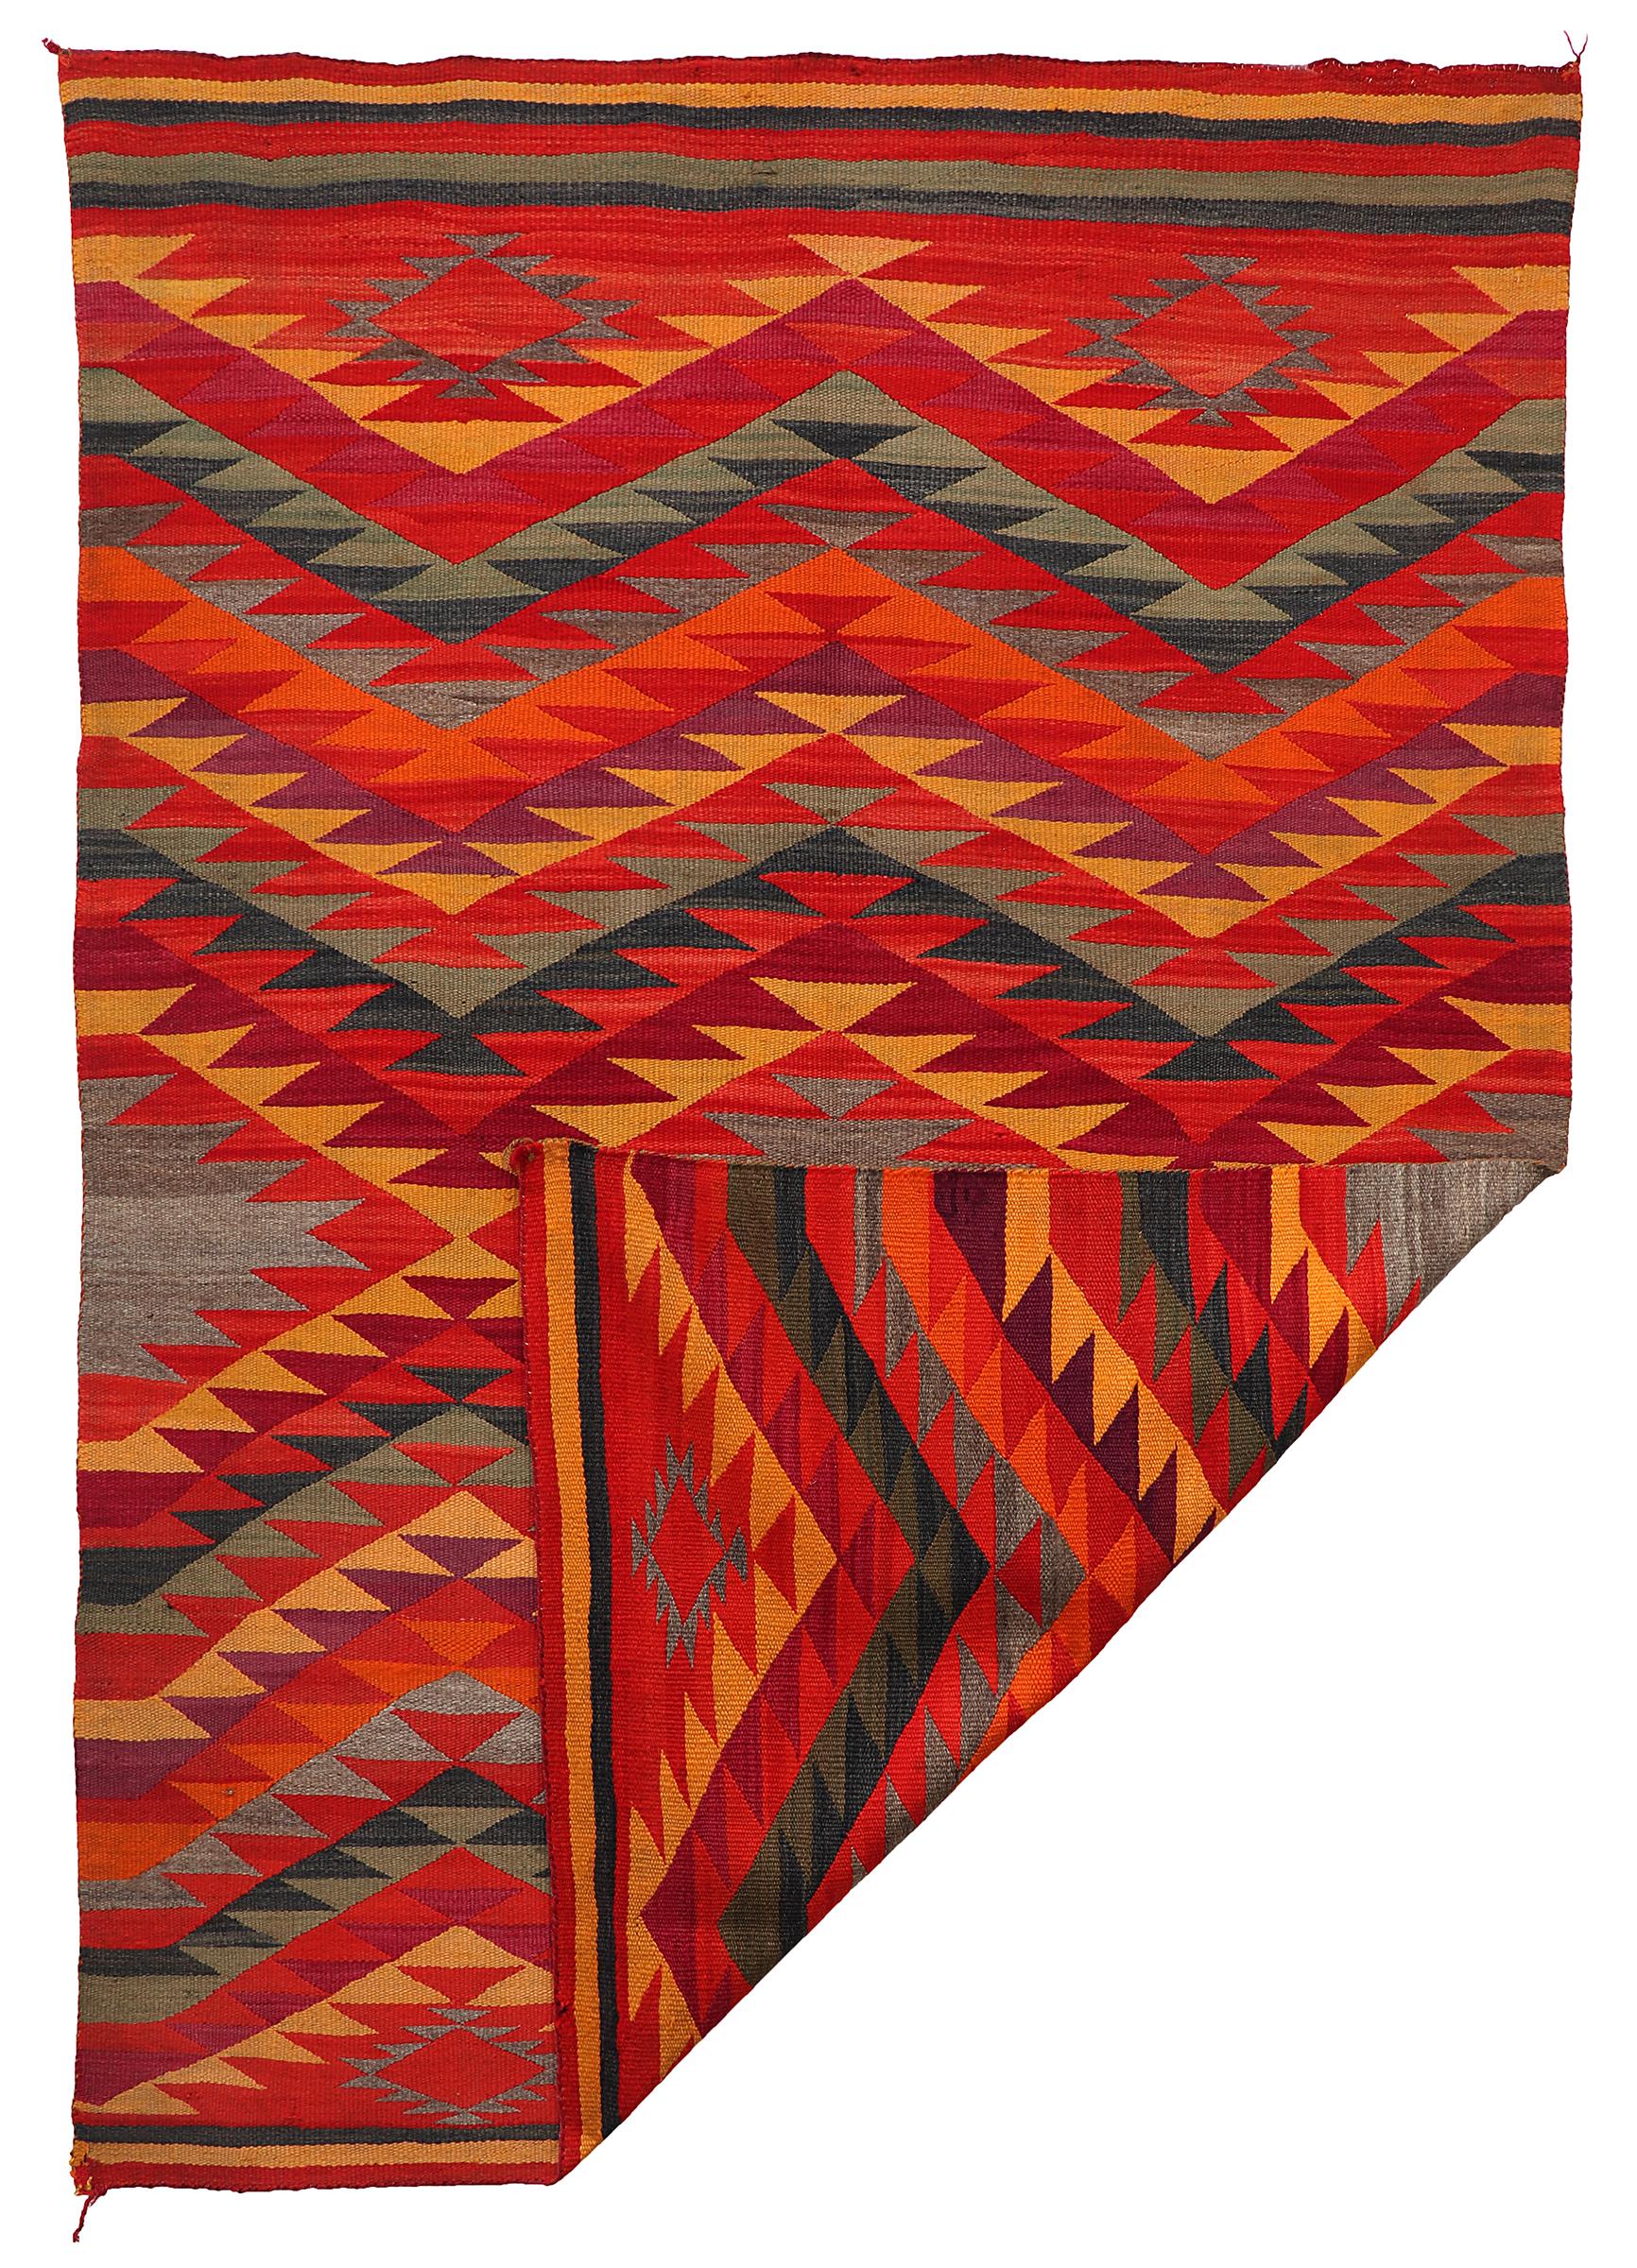 Jewel toned transitional period Navajo weaving circa 1885. Wool with aniline dyes, geometric design featuring repetition of triangles. Measures 77 x 54 1/4 inches. 

 